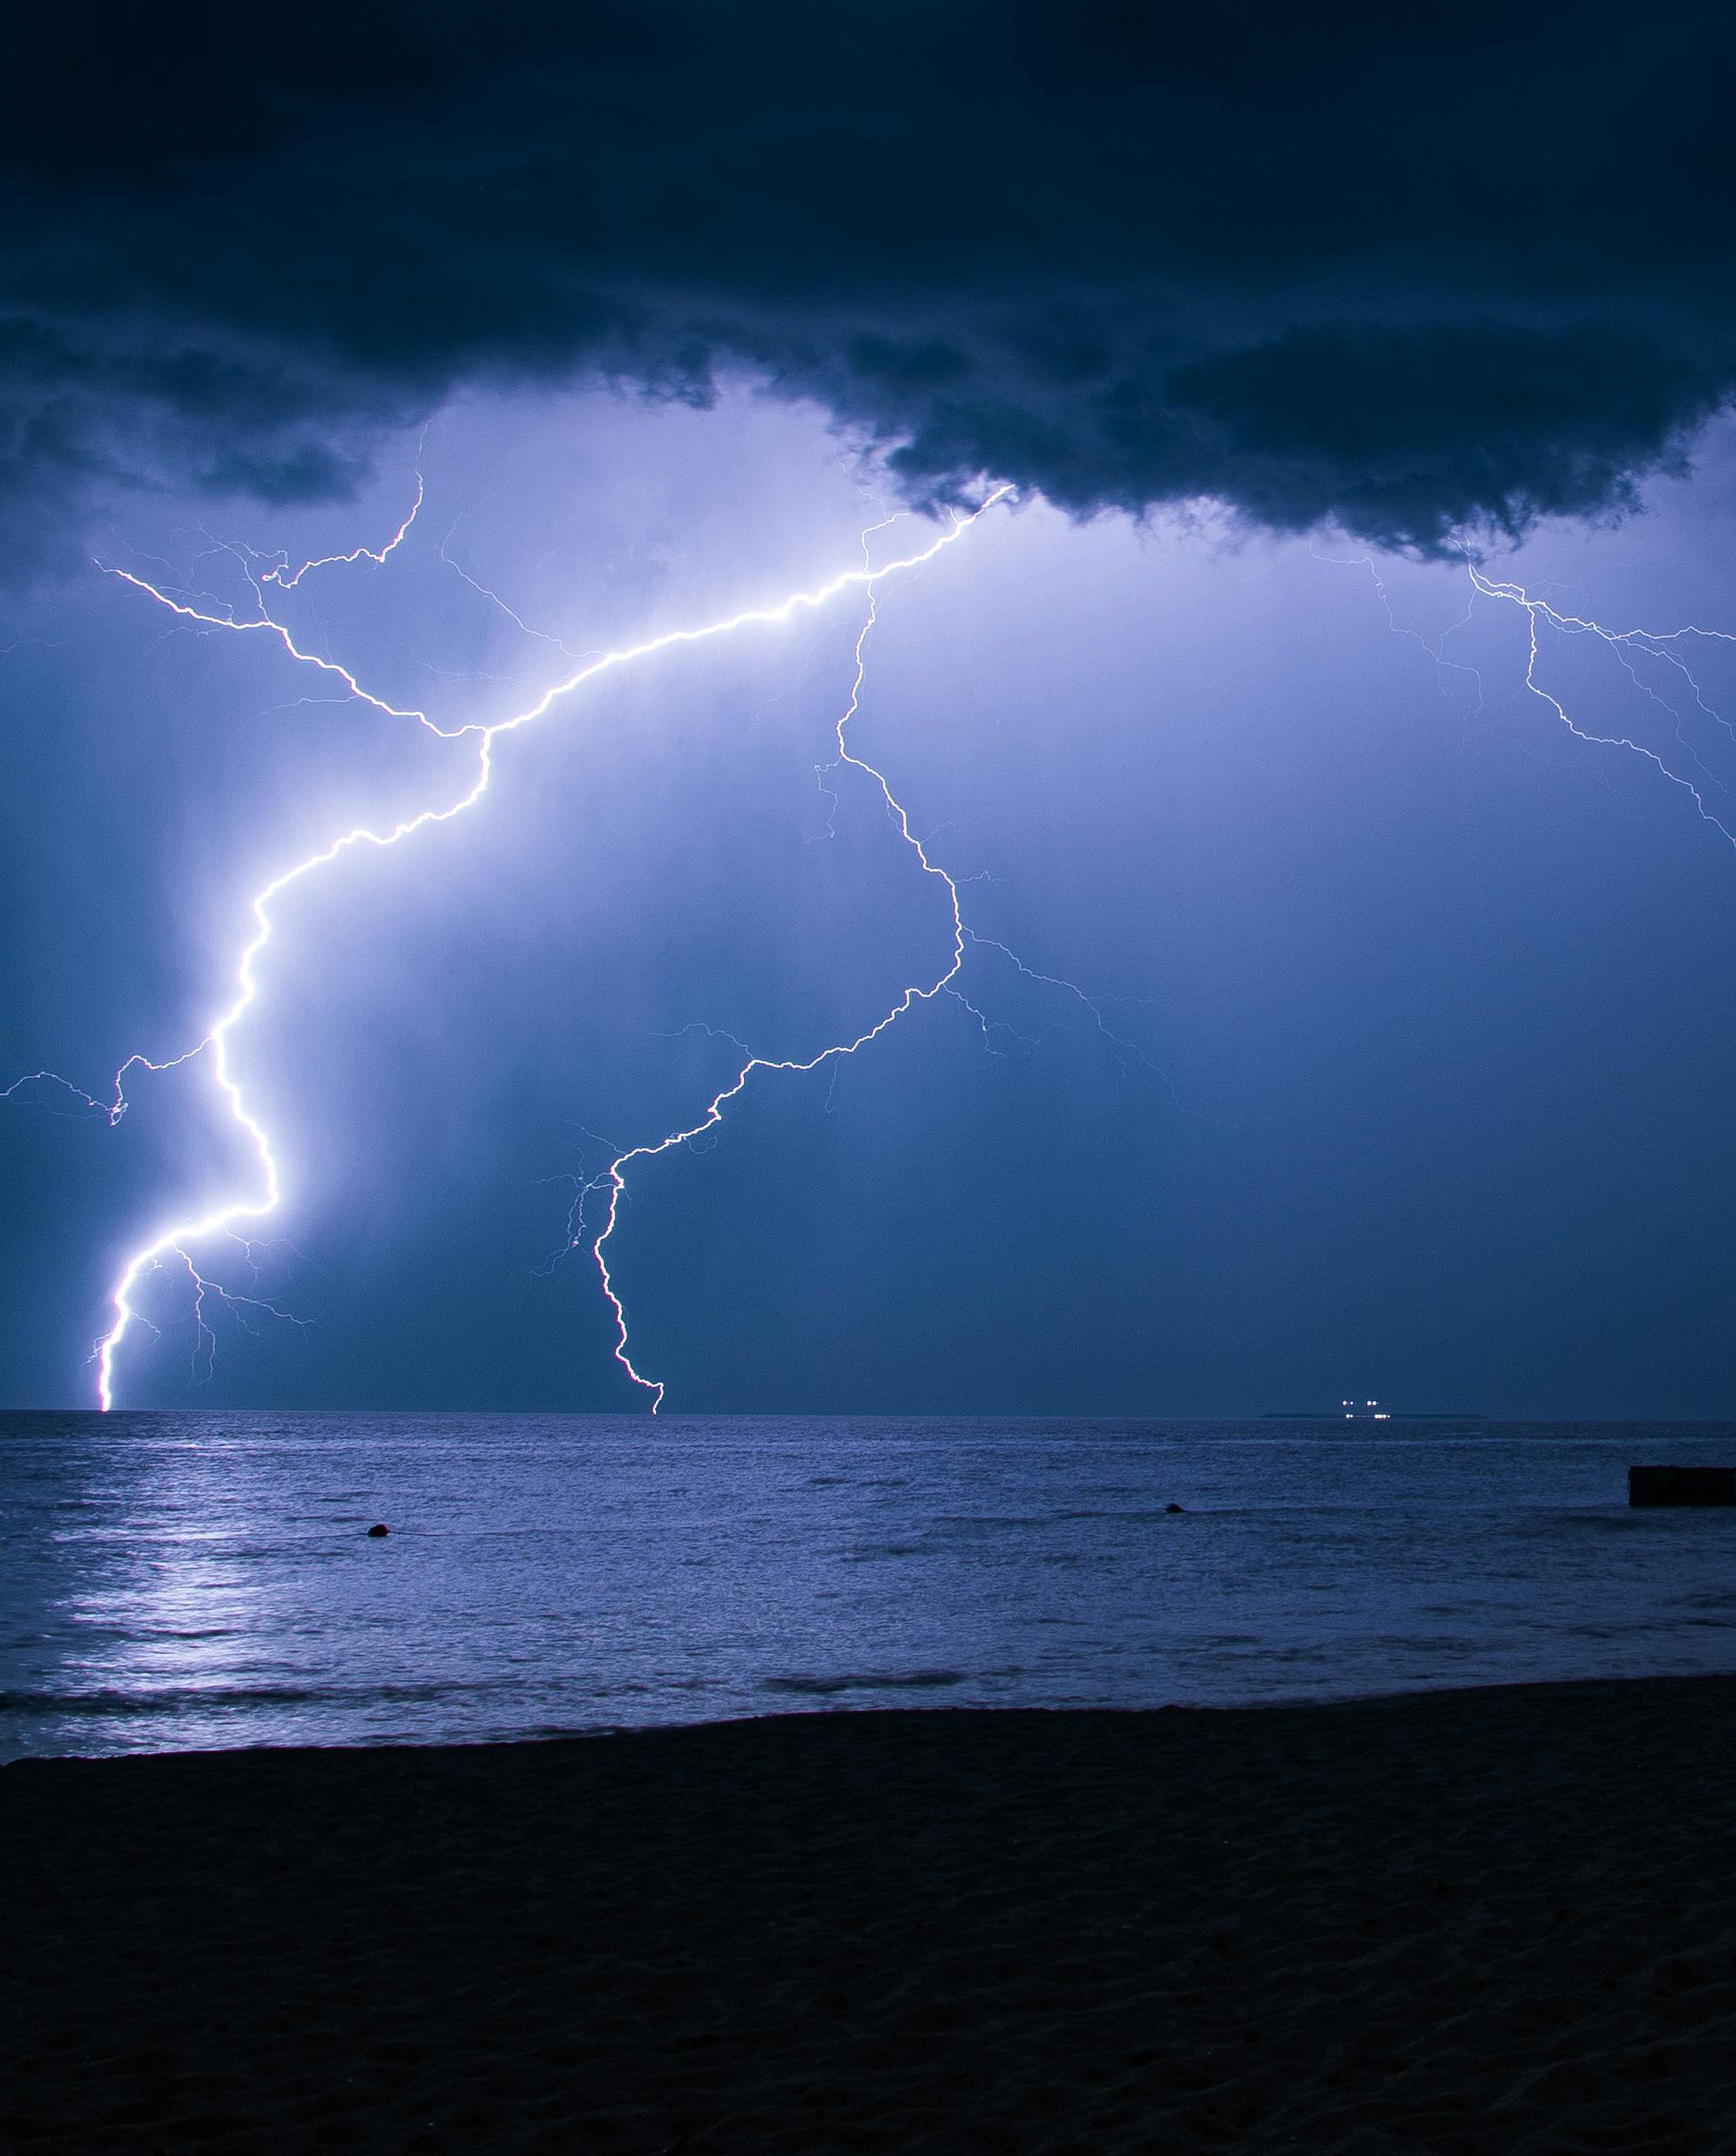 A View of a Lightning Strike From the Beach · Free Stock Photo